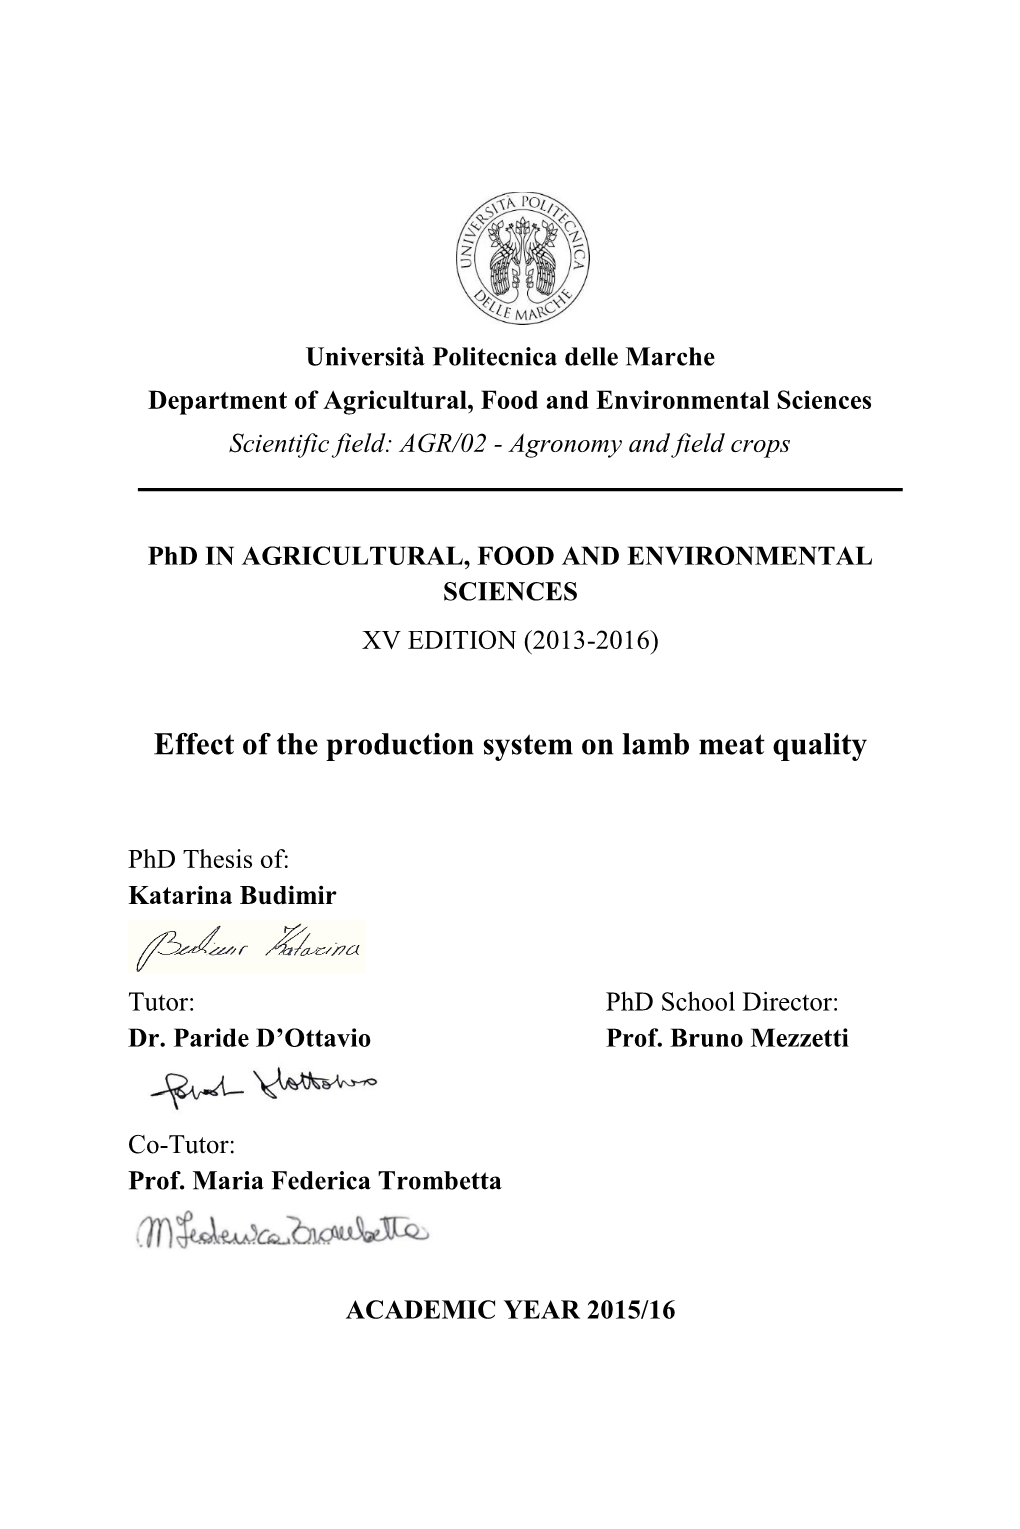 Effect of the Production System on Lamb Meat Quality